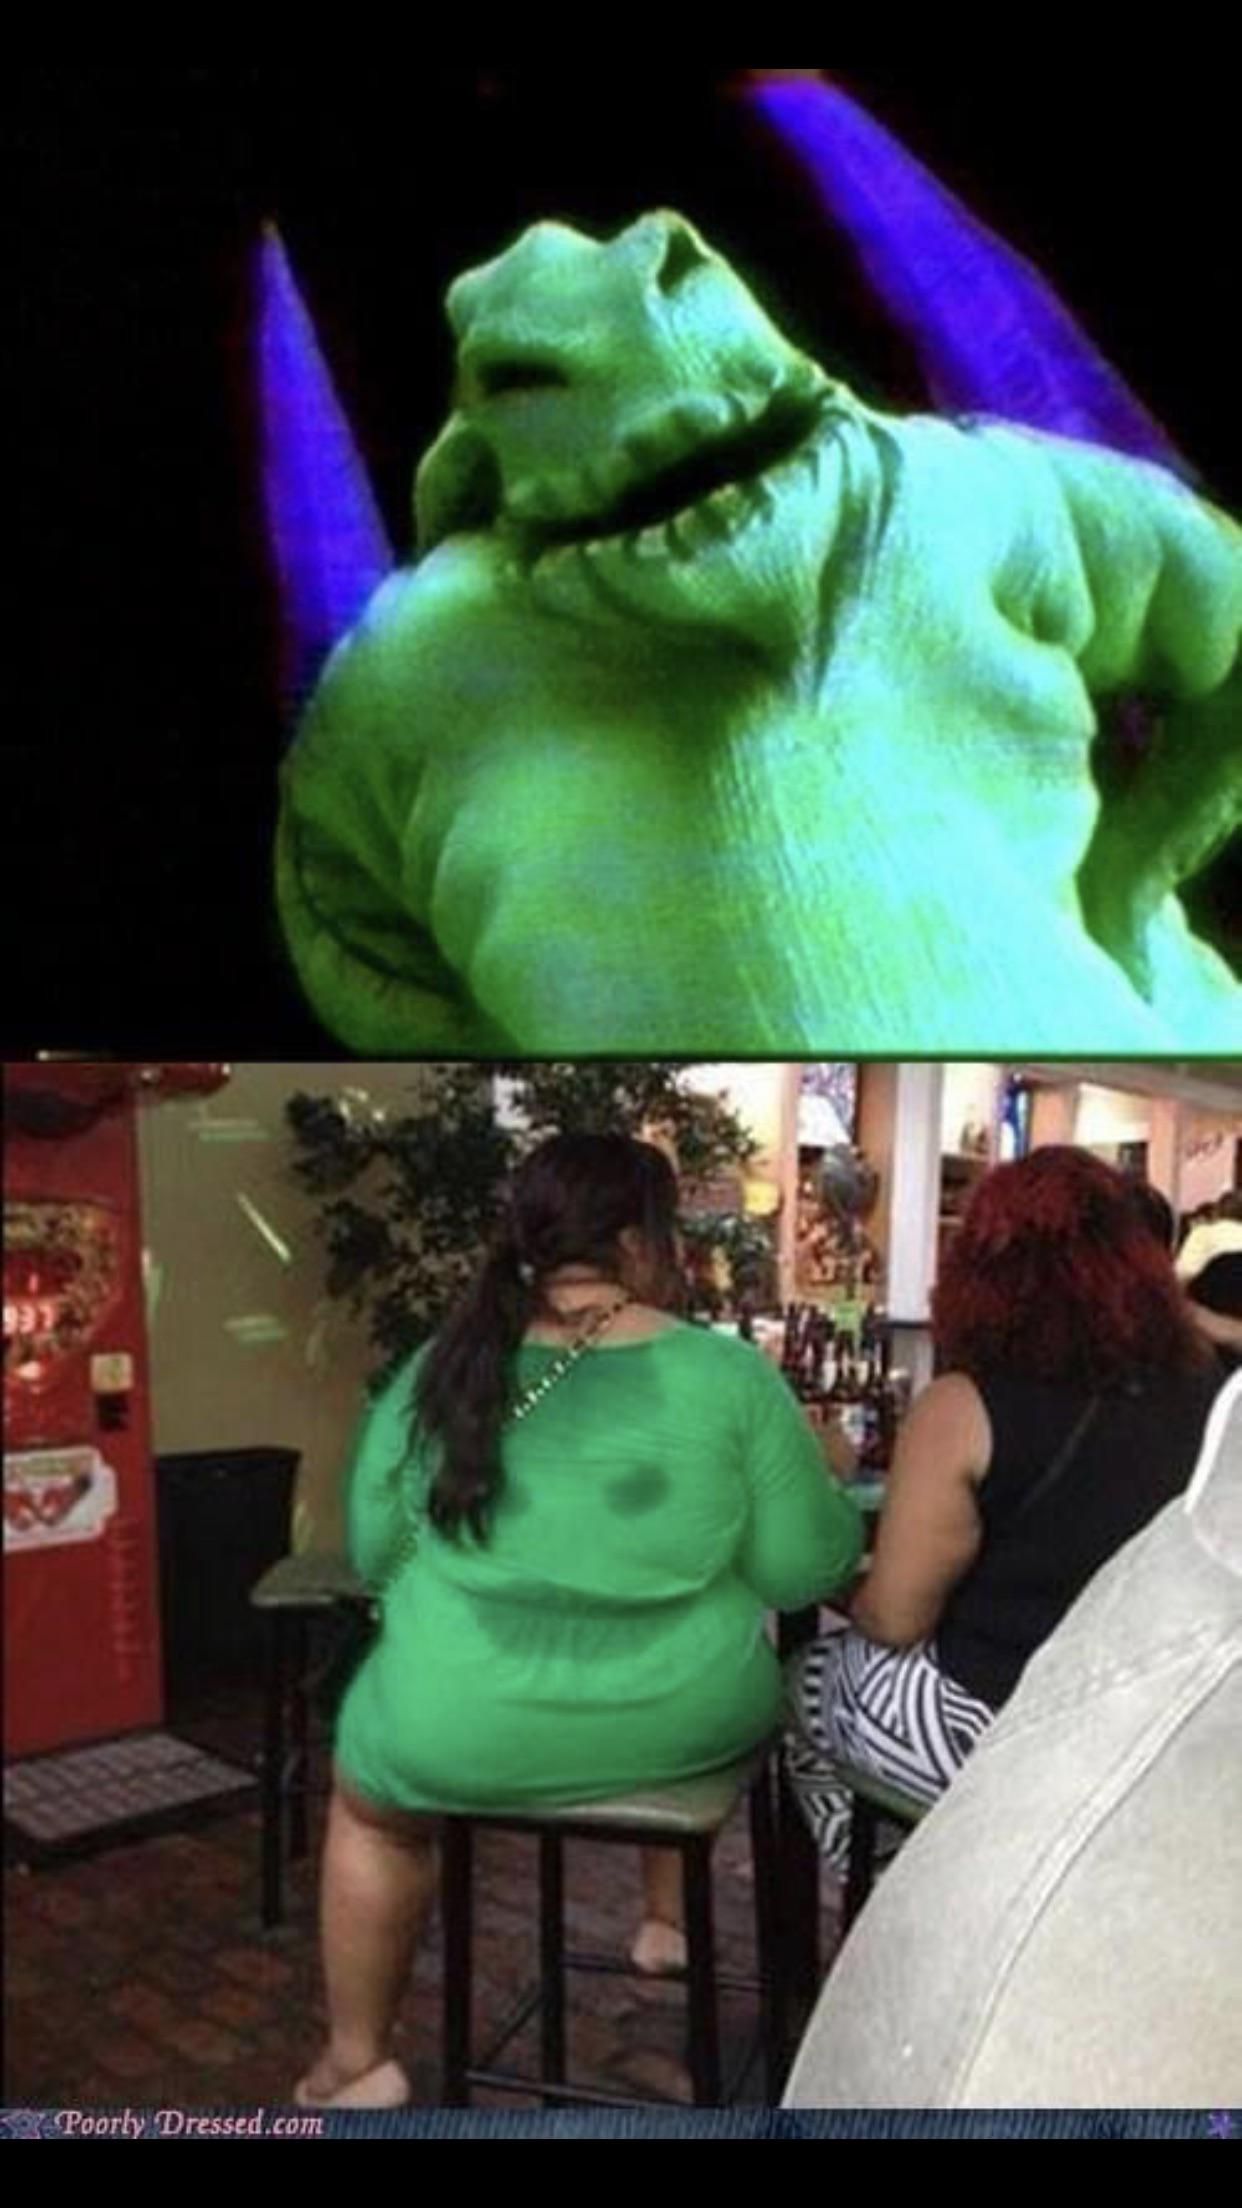 Oogie Boogie hasn't been getting the best gigs lately.